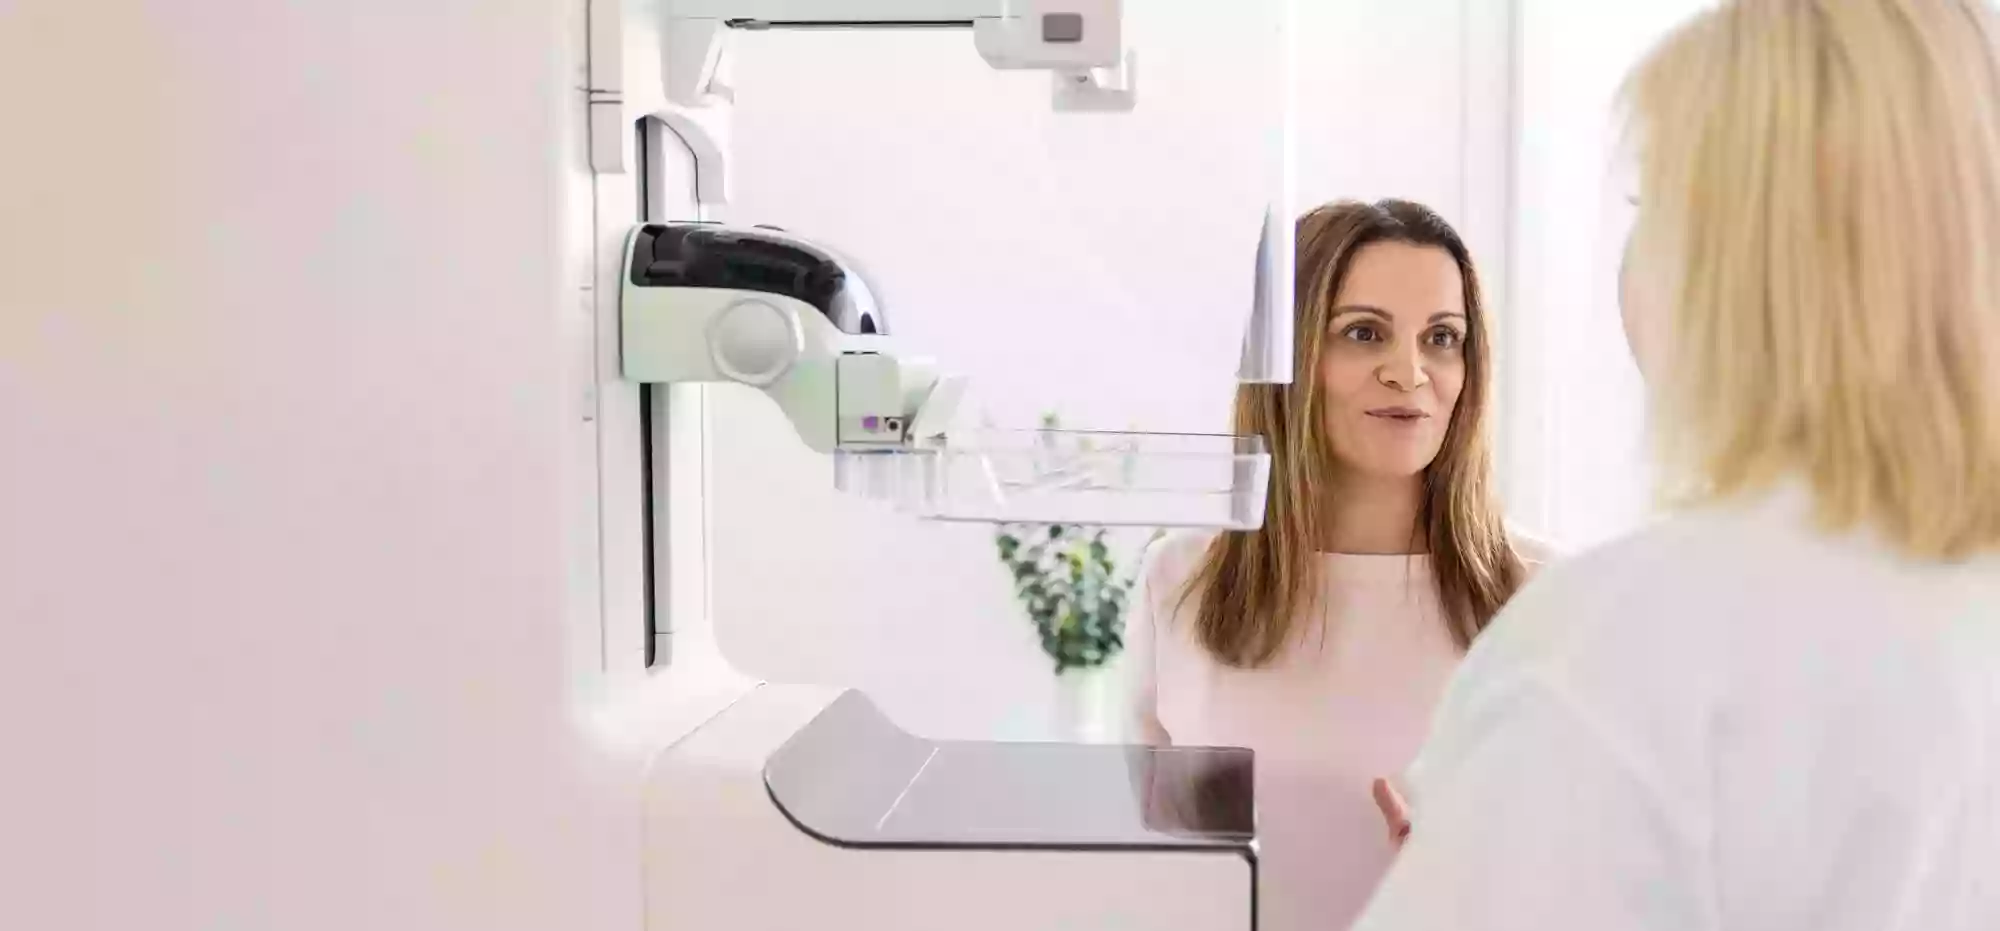 difw | Diagnostic Imaging for Women